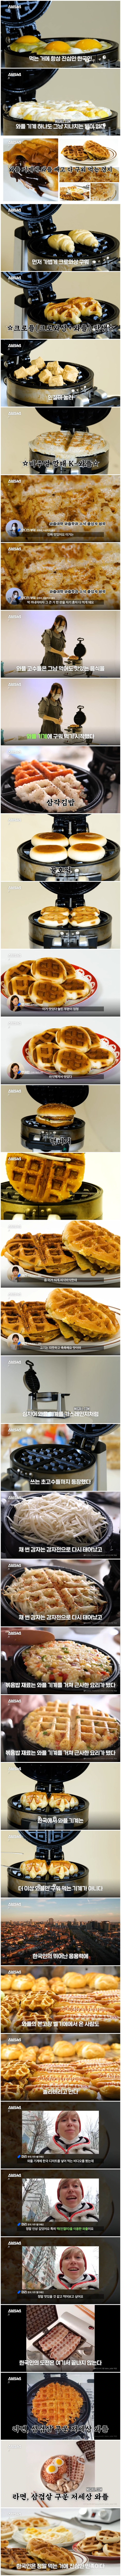 The use of waffle machines by Koreans who are surprised by Belgians.